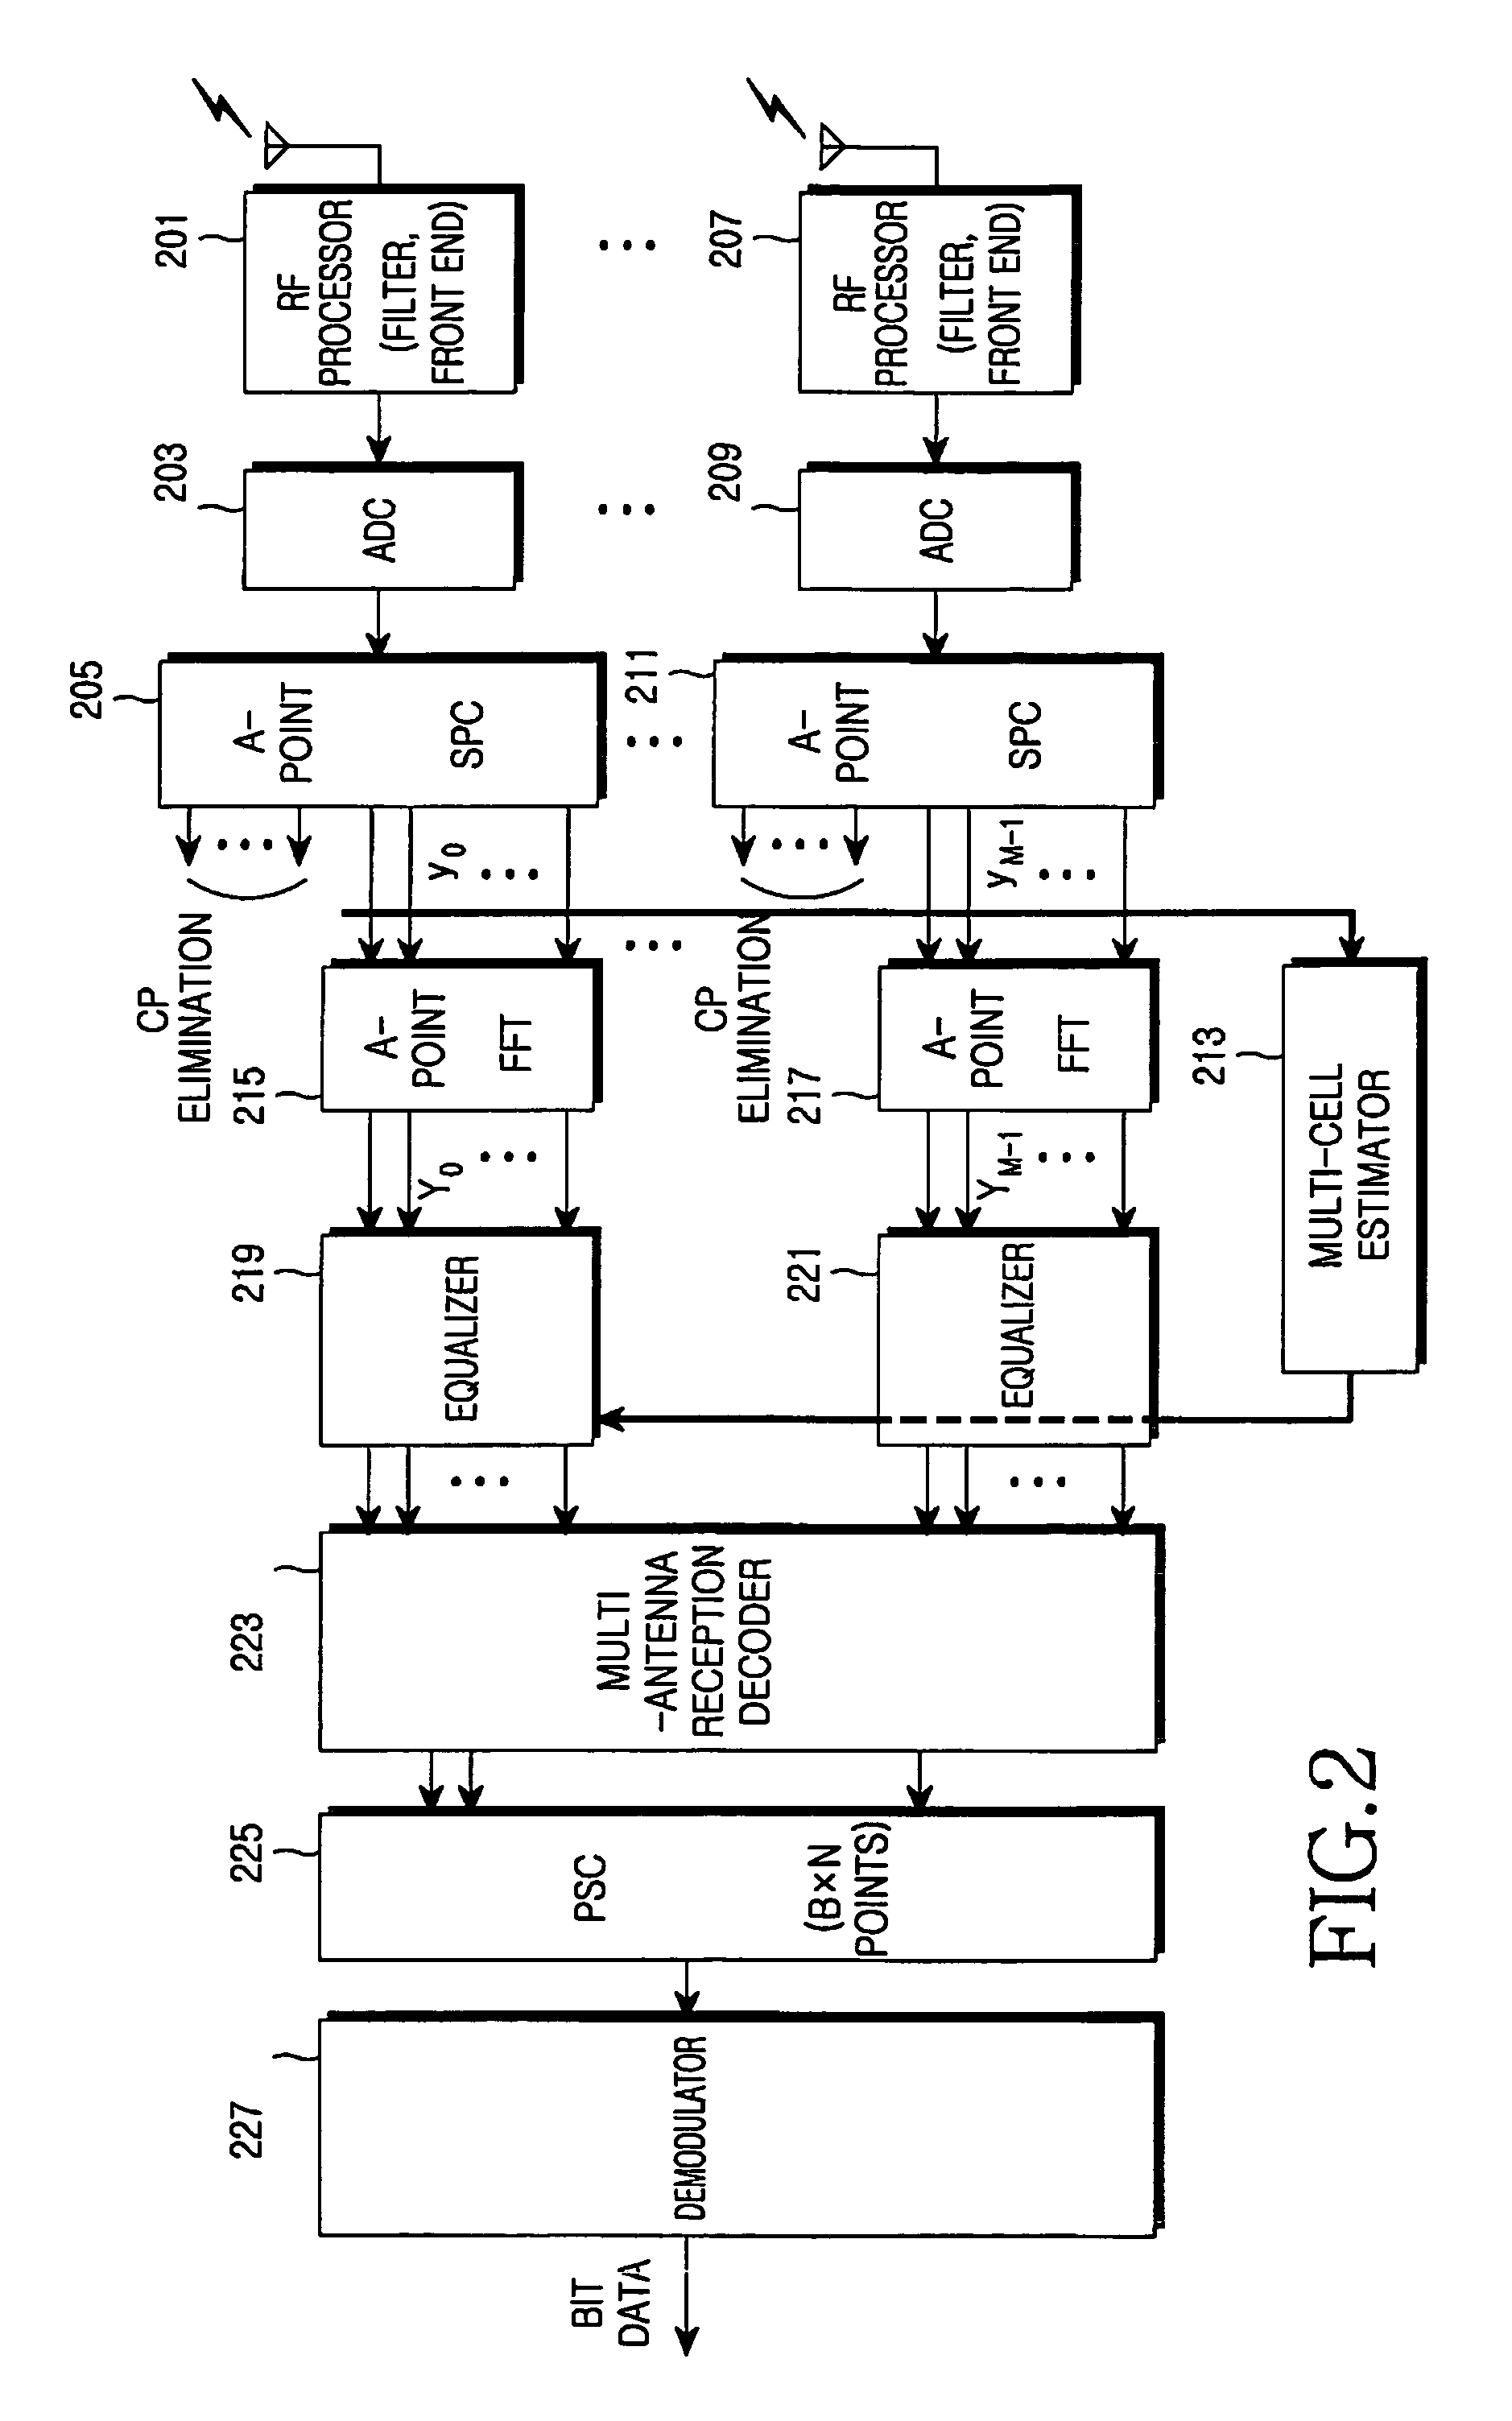 Apparatus and method for channel estimation in an orthogonal frequency division multiplexing cellular communication system using multiple transmit antennas